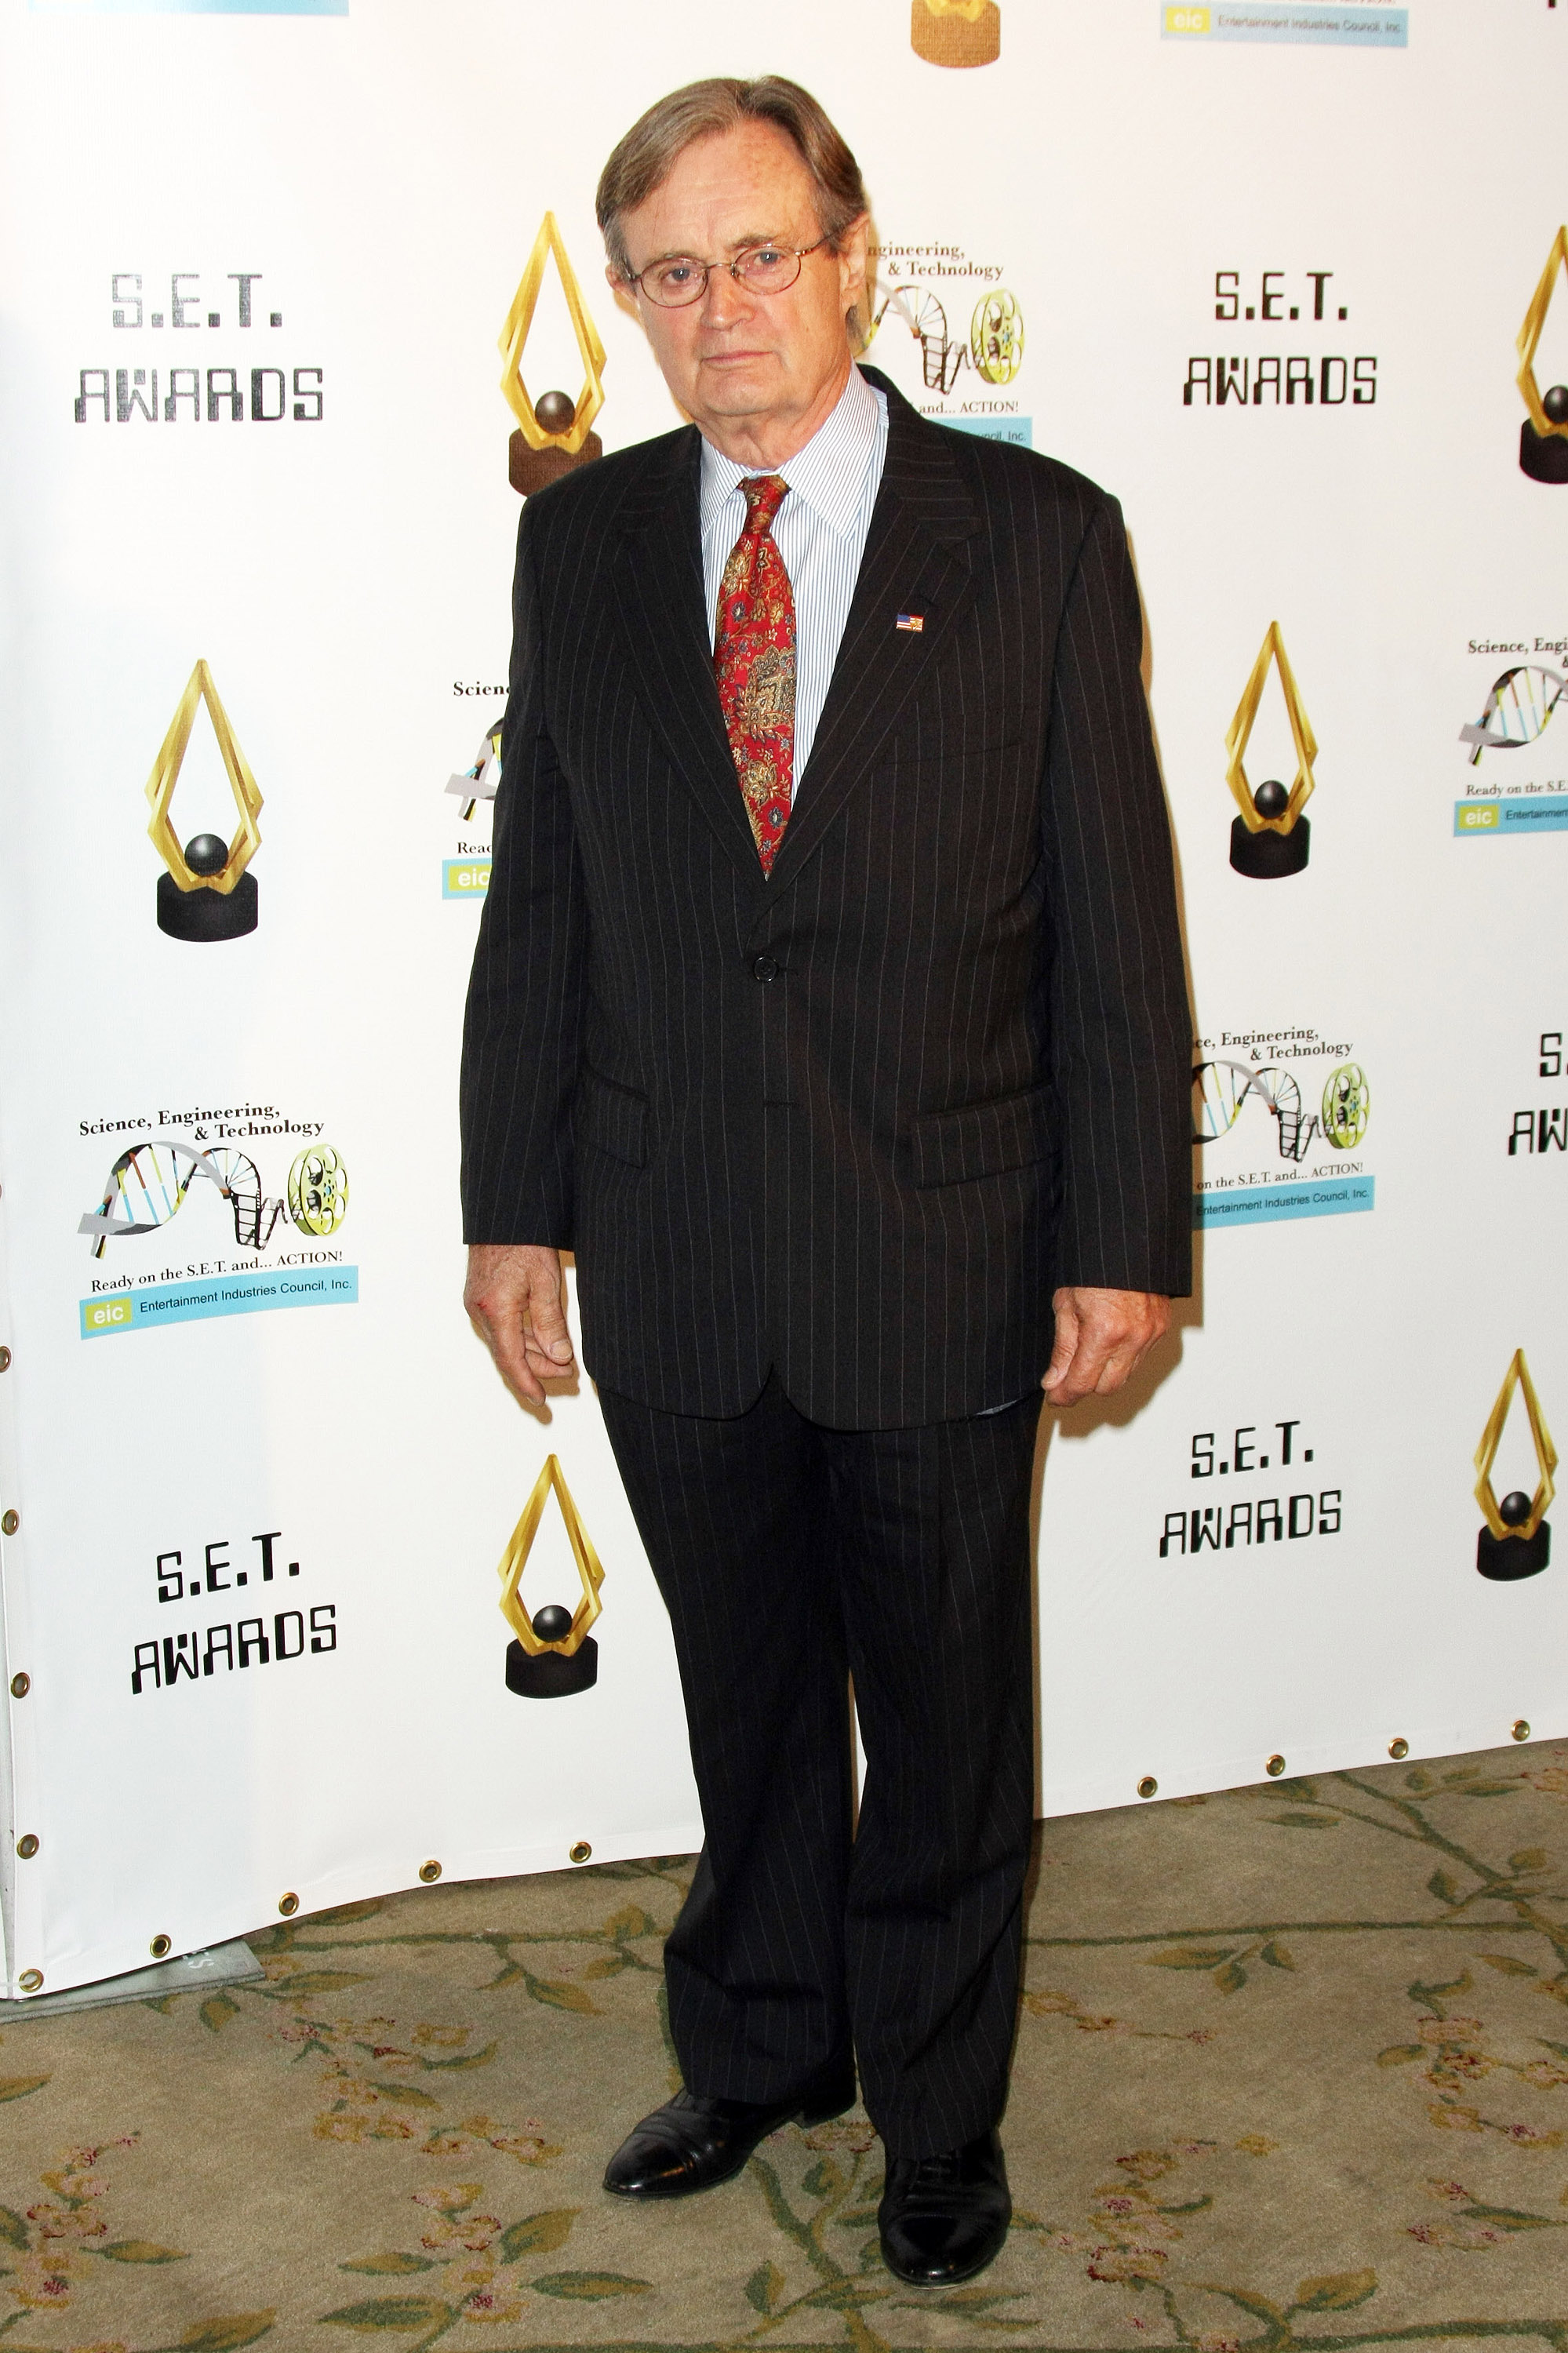 David McCallum at the 2nd Annual TV Film Science Tech Awards in Beverly Hills, California on November 15, 2012 | Source: Getty Images